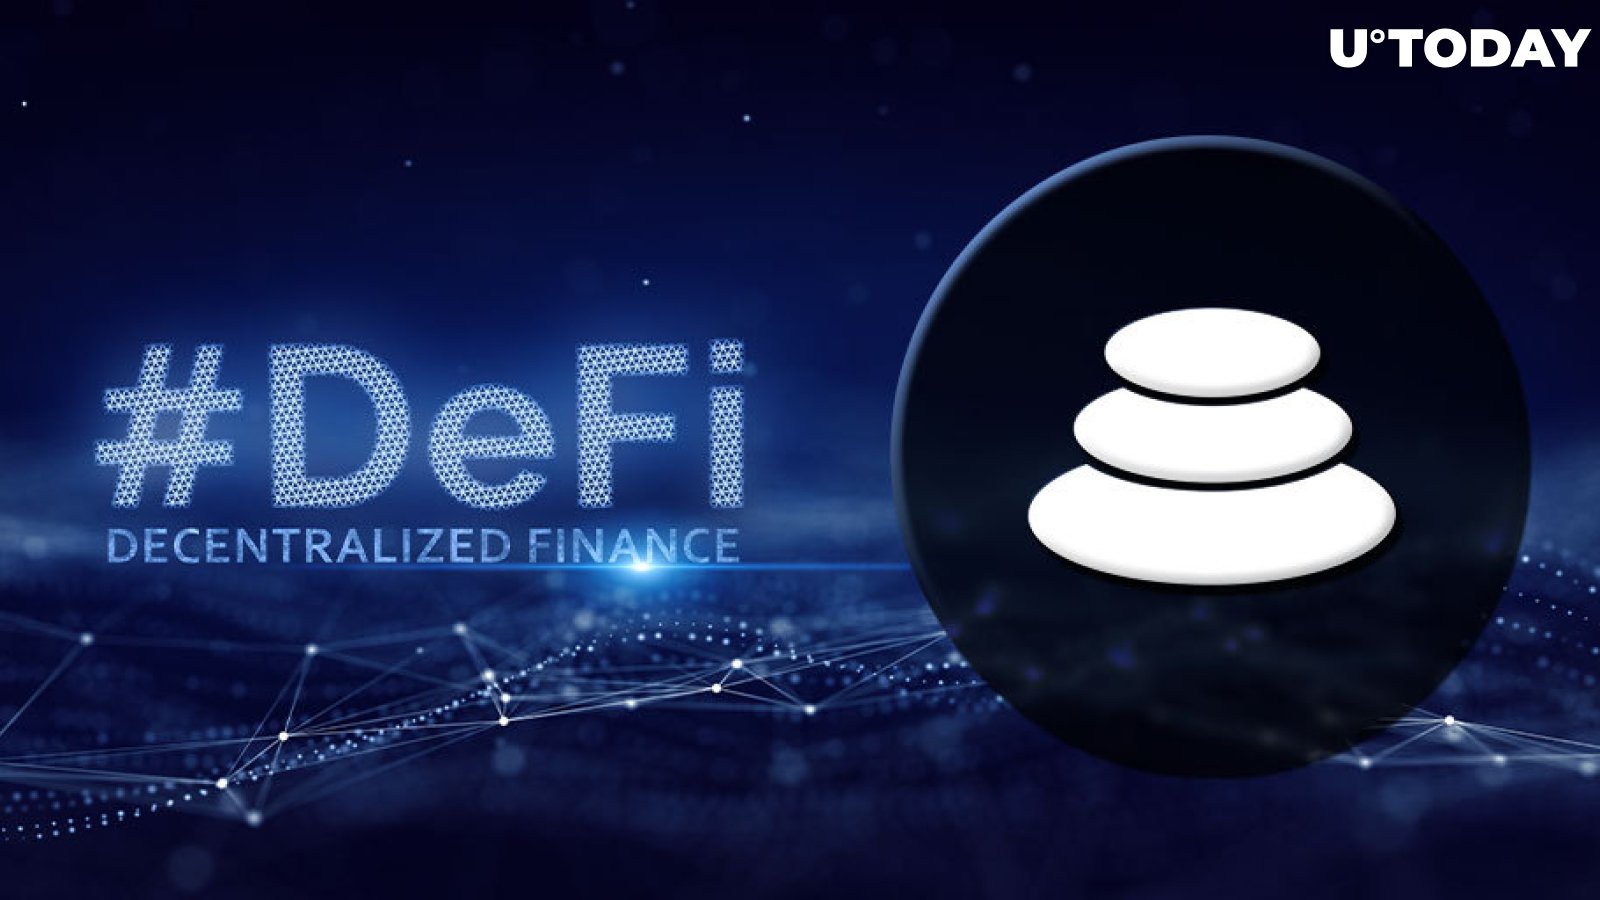 Breaking: Balancer DeFi Reports "Issues," Asks LPs To Remove Liquidity ASAP